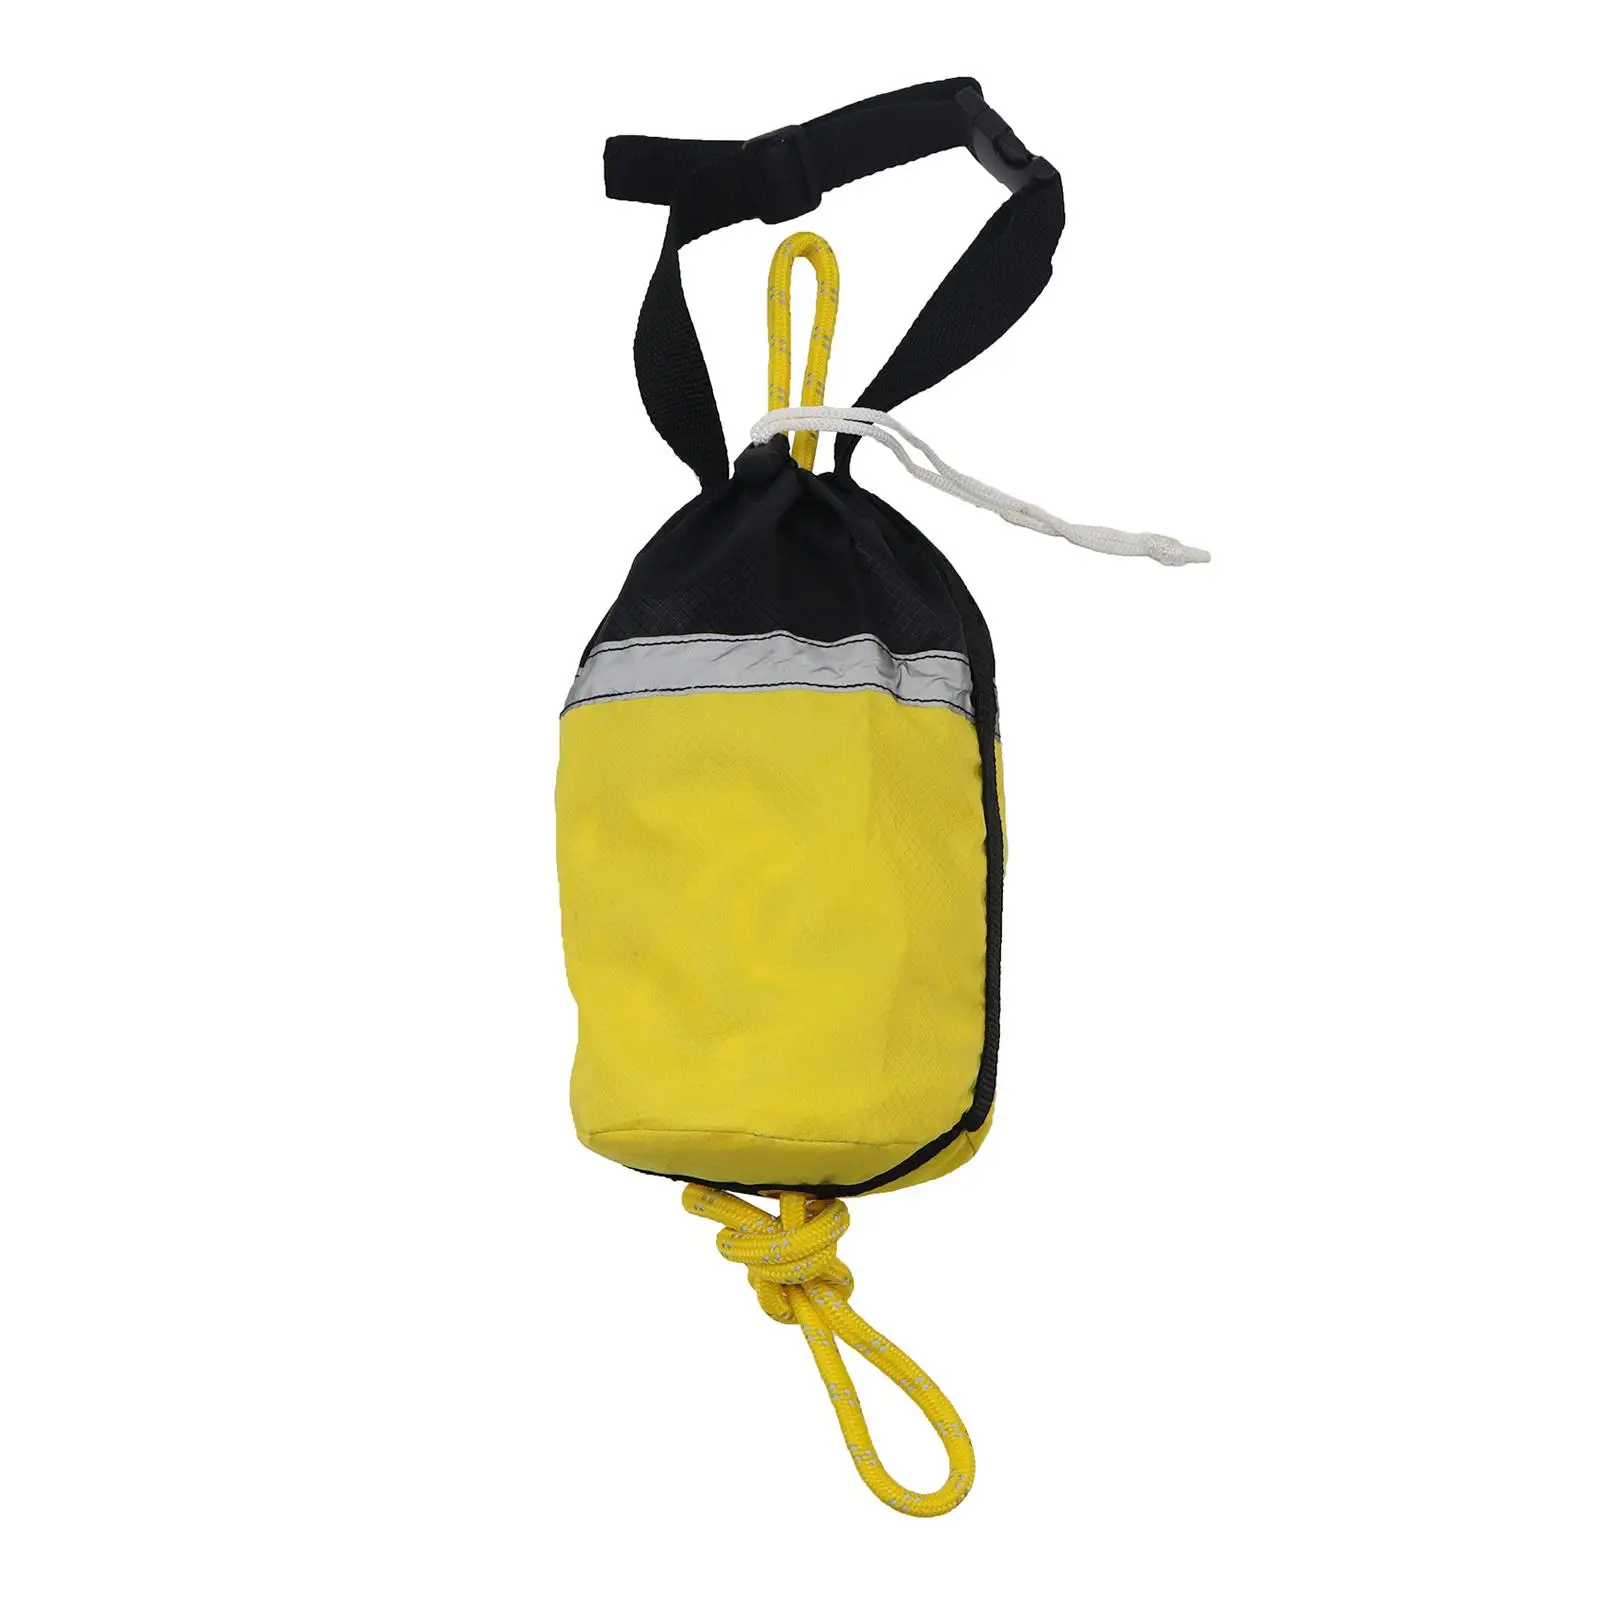 Throw Bag with 16M Throw Rope Throwable for Ice Fishing Boating Water Sports